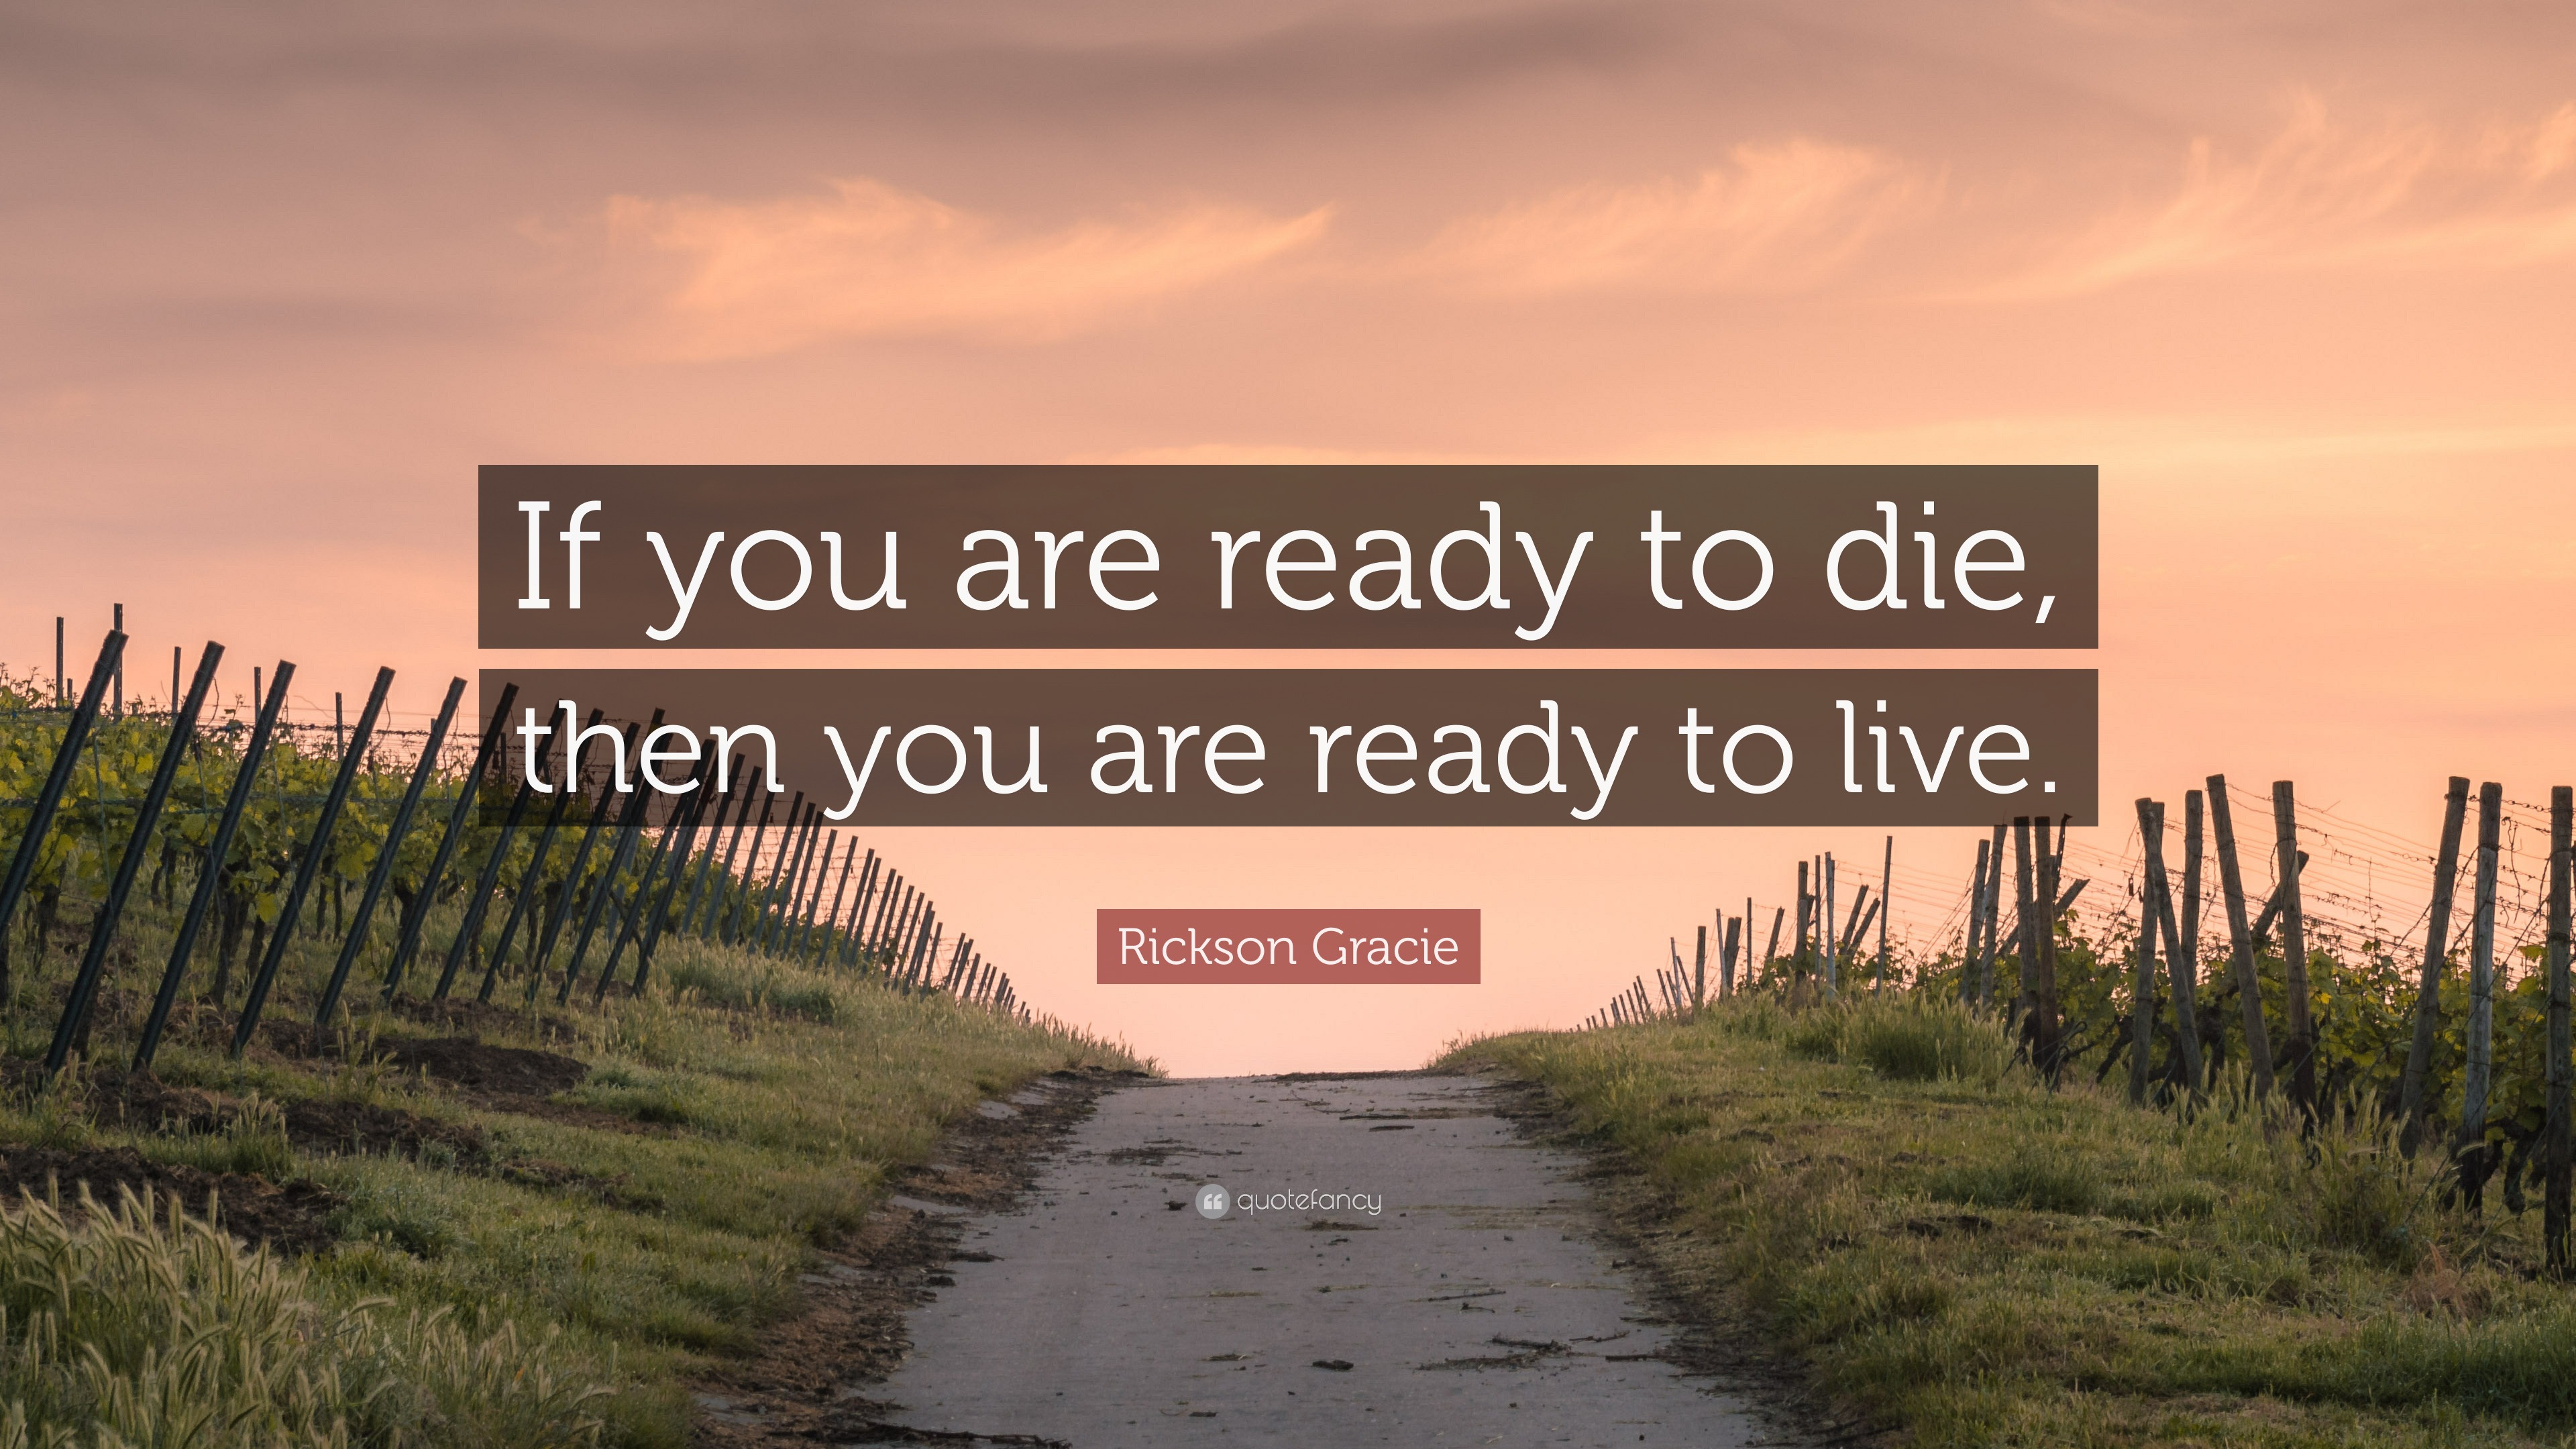 2449430 Rickson Gracie Quote If You Are Ready To Die Then You Are Ready To 